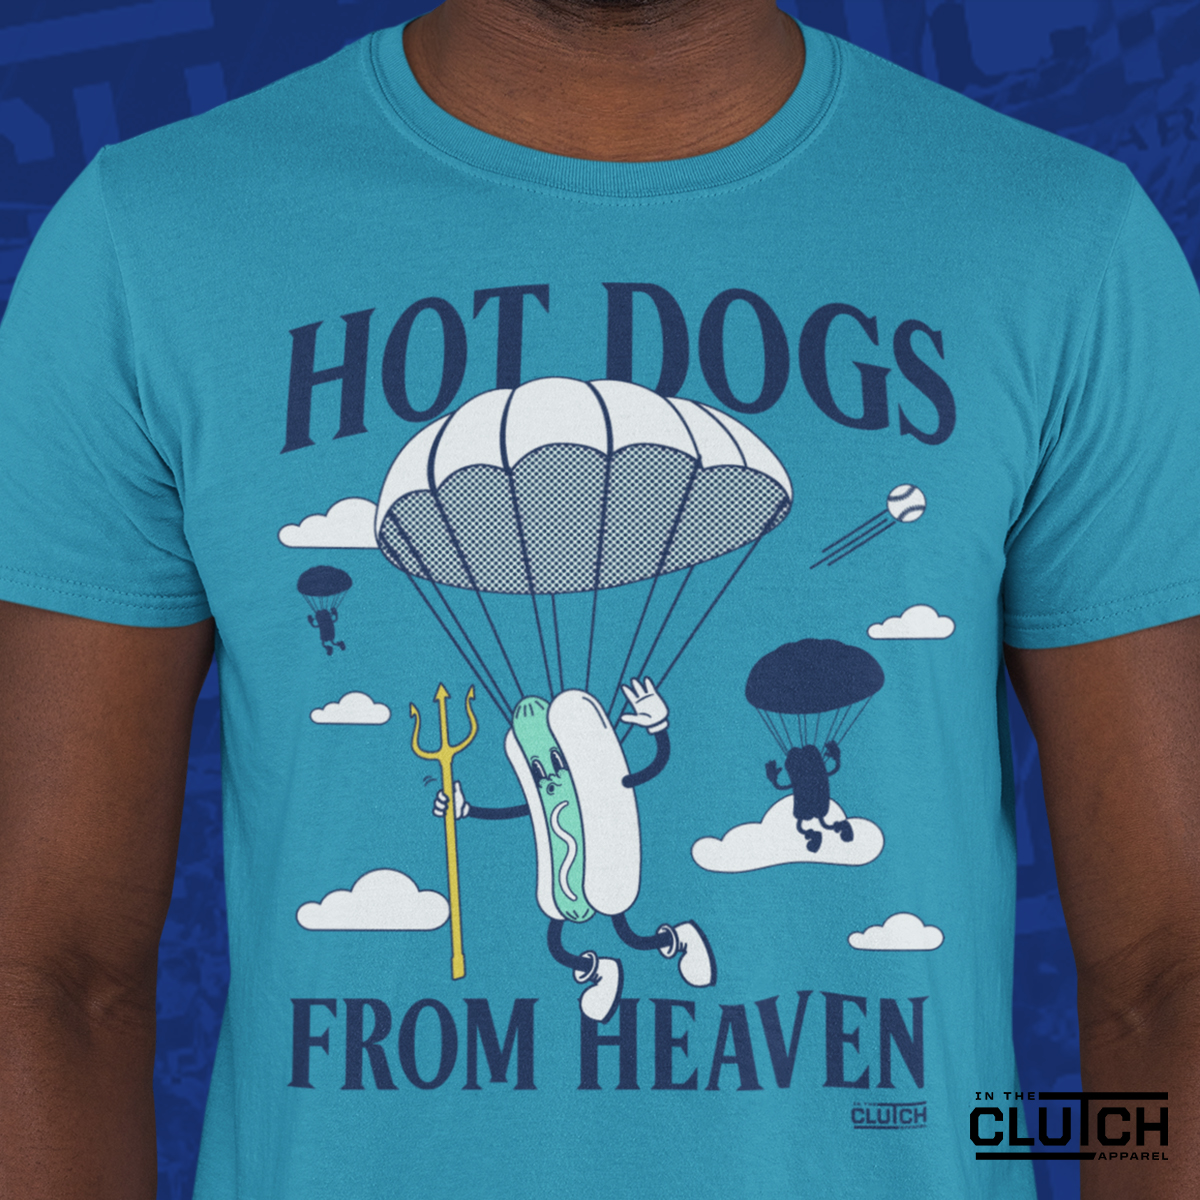 Seattle baseball fans are living the dream with hot dogs flying down from heaven. 🌭🪂
👉 intheclutch.com/Seattle
.
.
#SeaUsRise #SeattleMariners #Mariners #TridentsUp